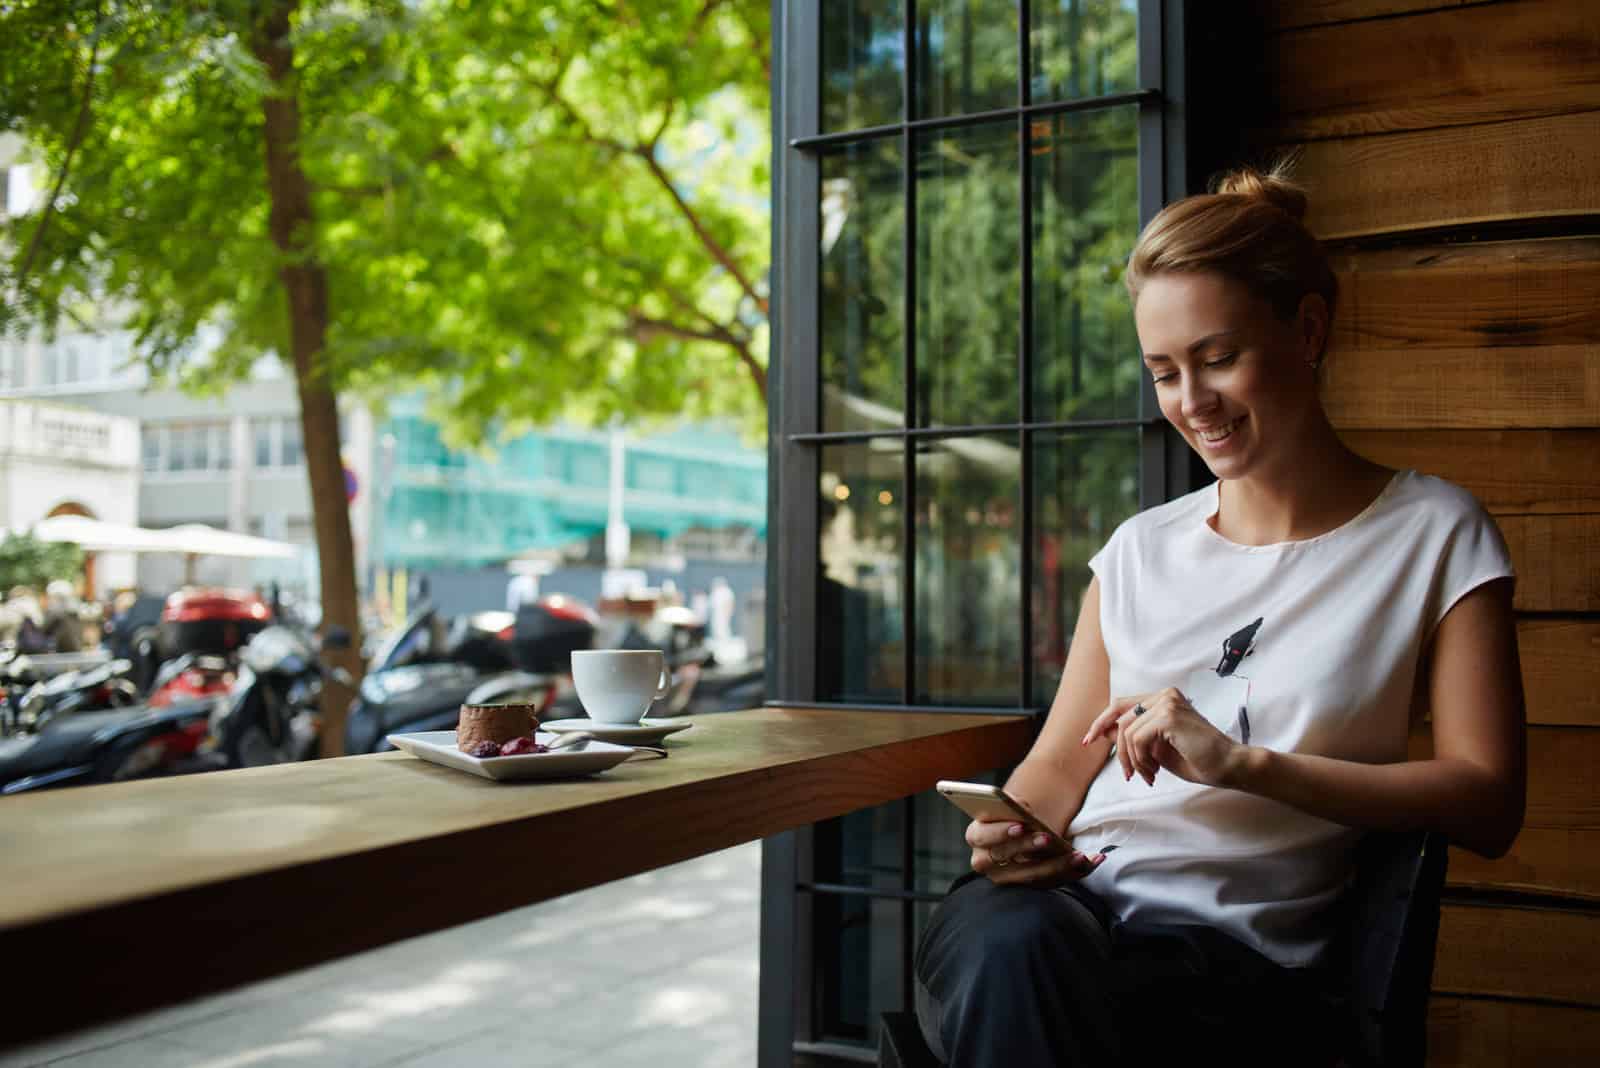 a woman with tied hair is sitting in a cafe holding a phone in her hand